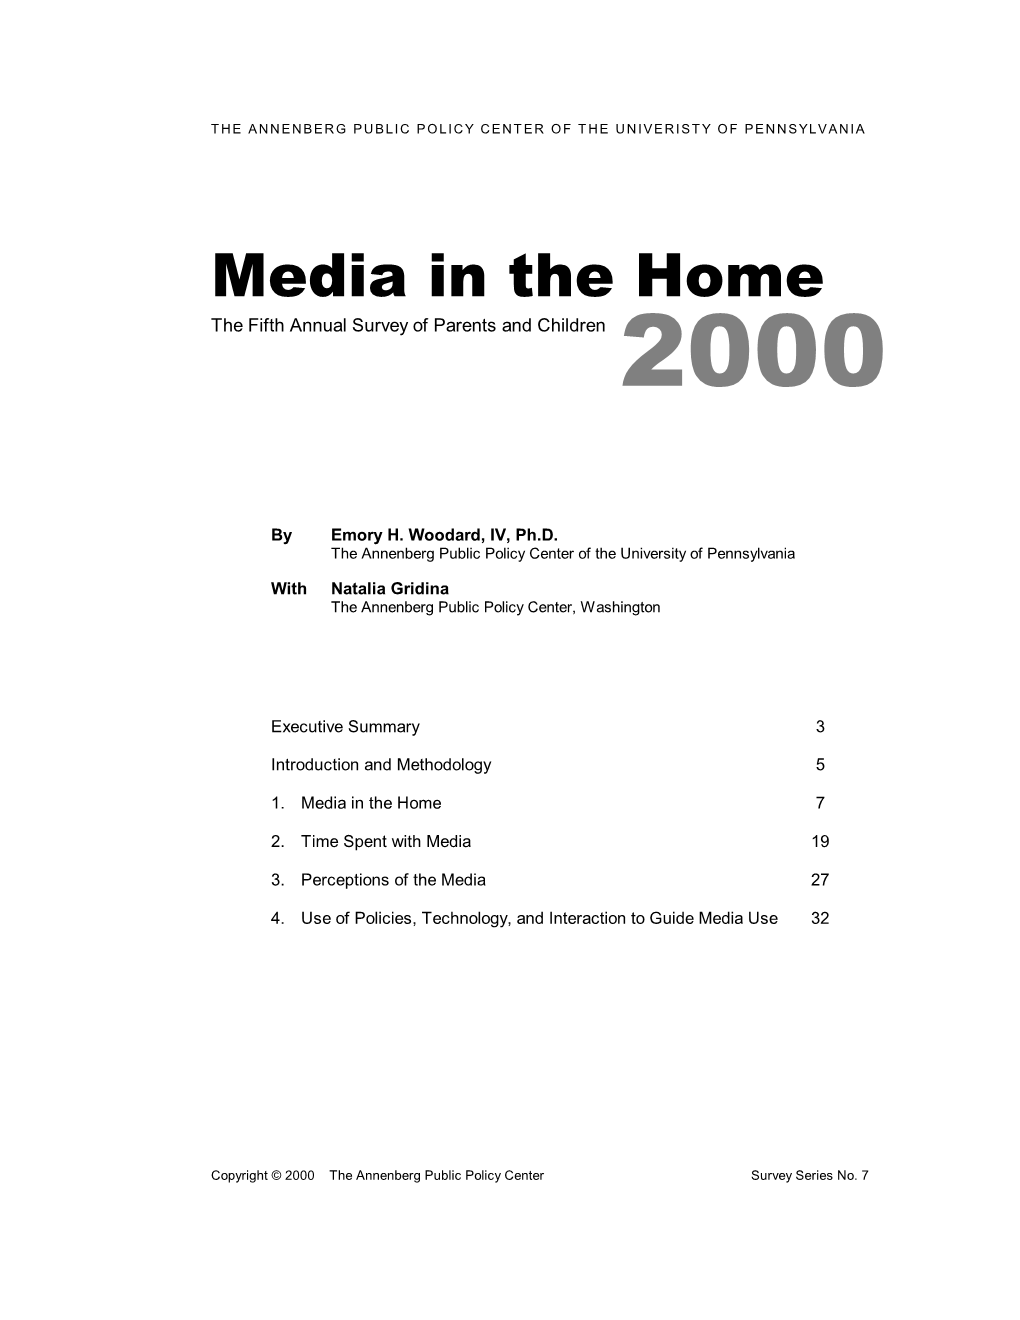 Media in the Home the Fifth Annual Survey of Parents and Children 2000